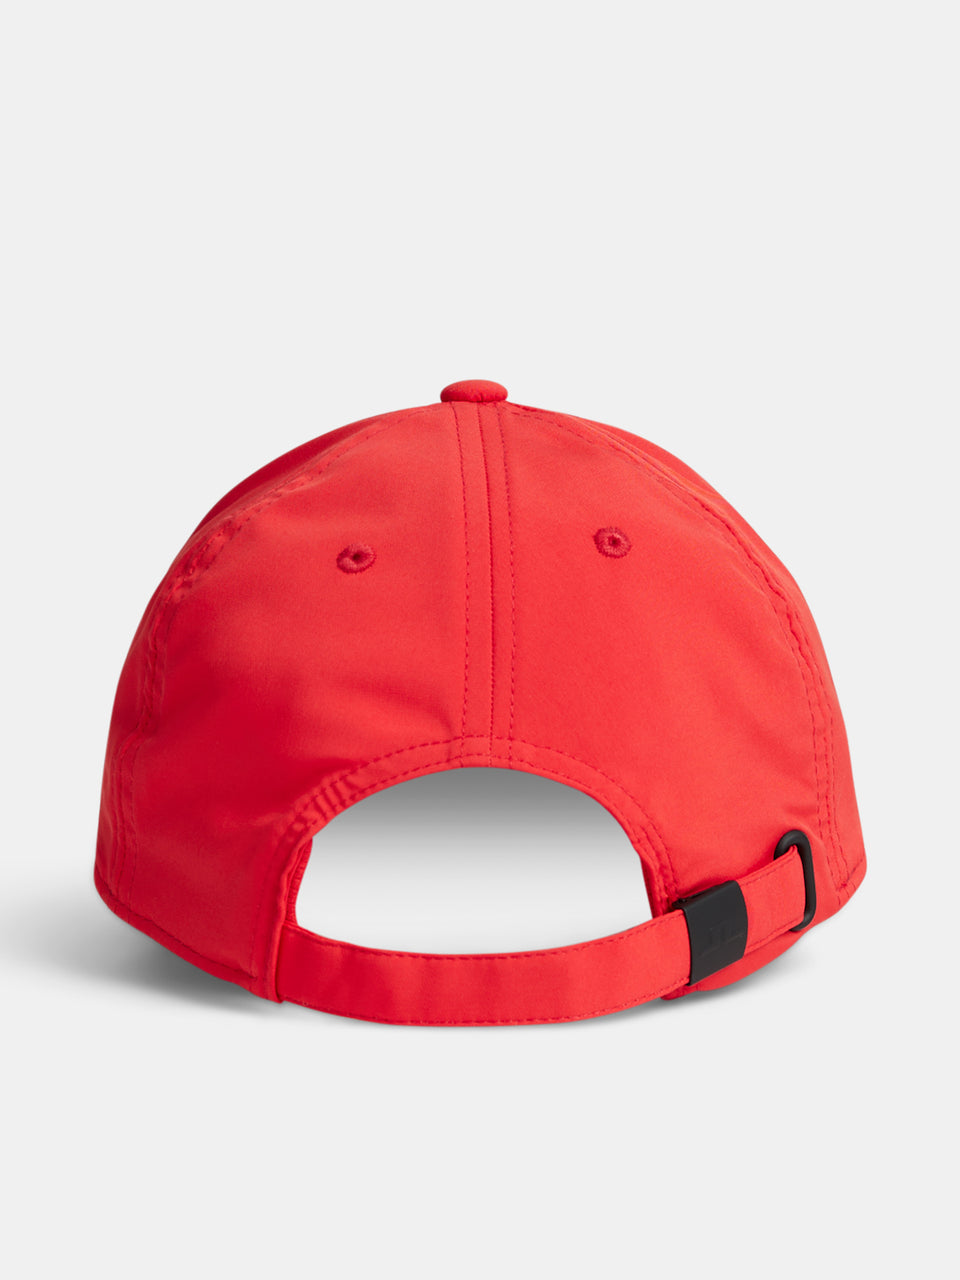 Angus Cap / Fiery Red